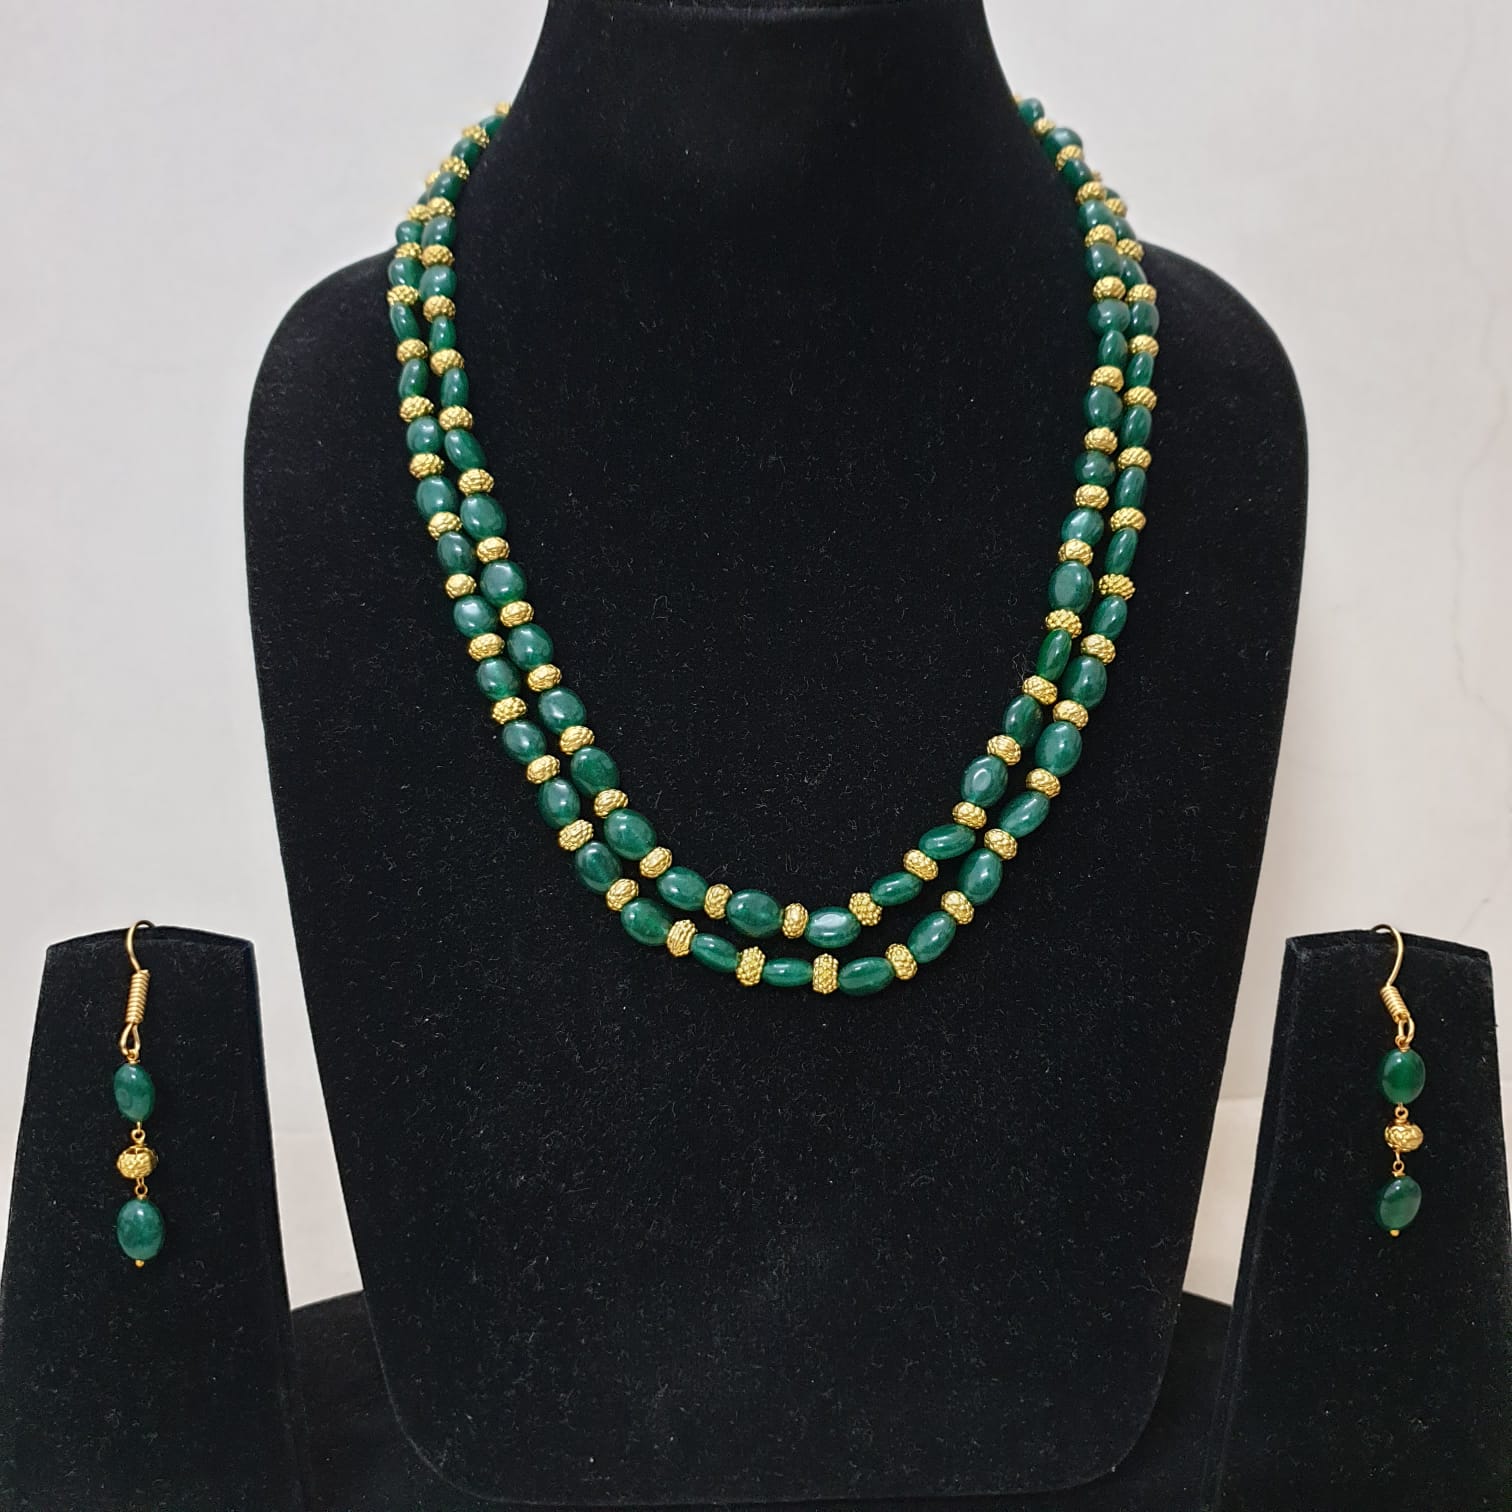 Two Layers Green Beads Stone Necklace and Earrings